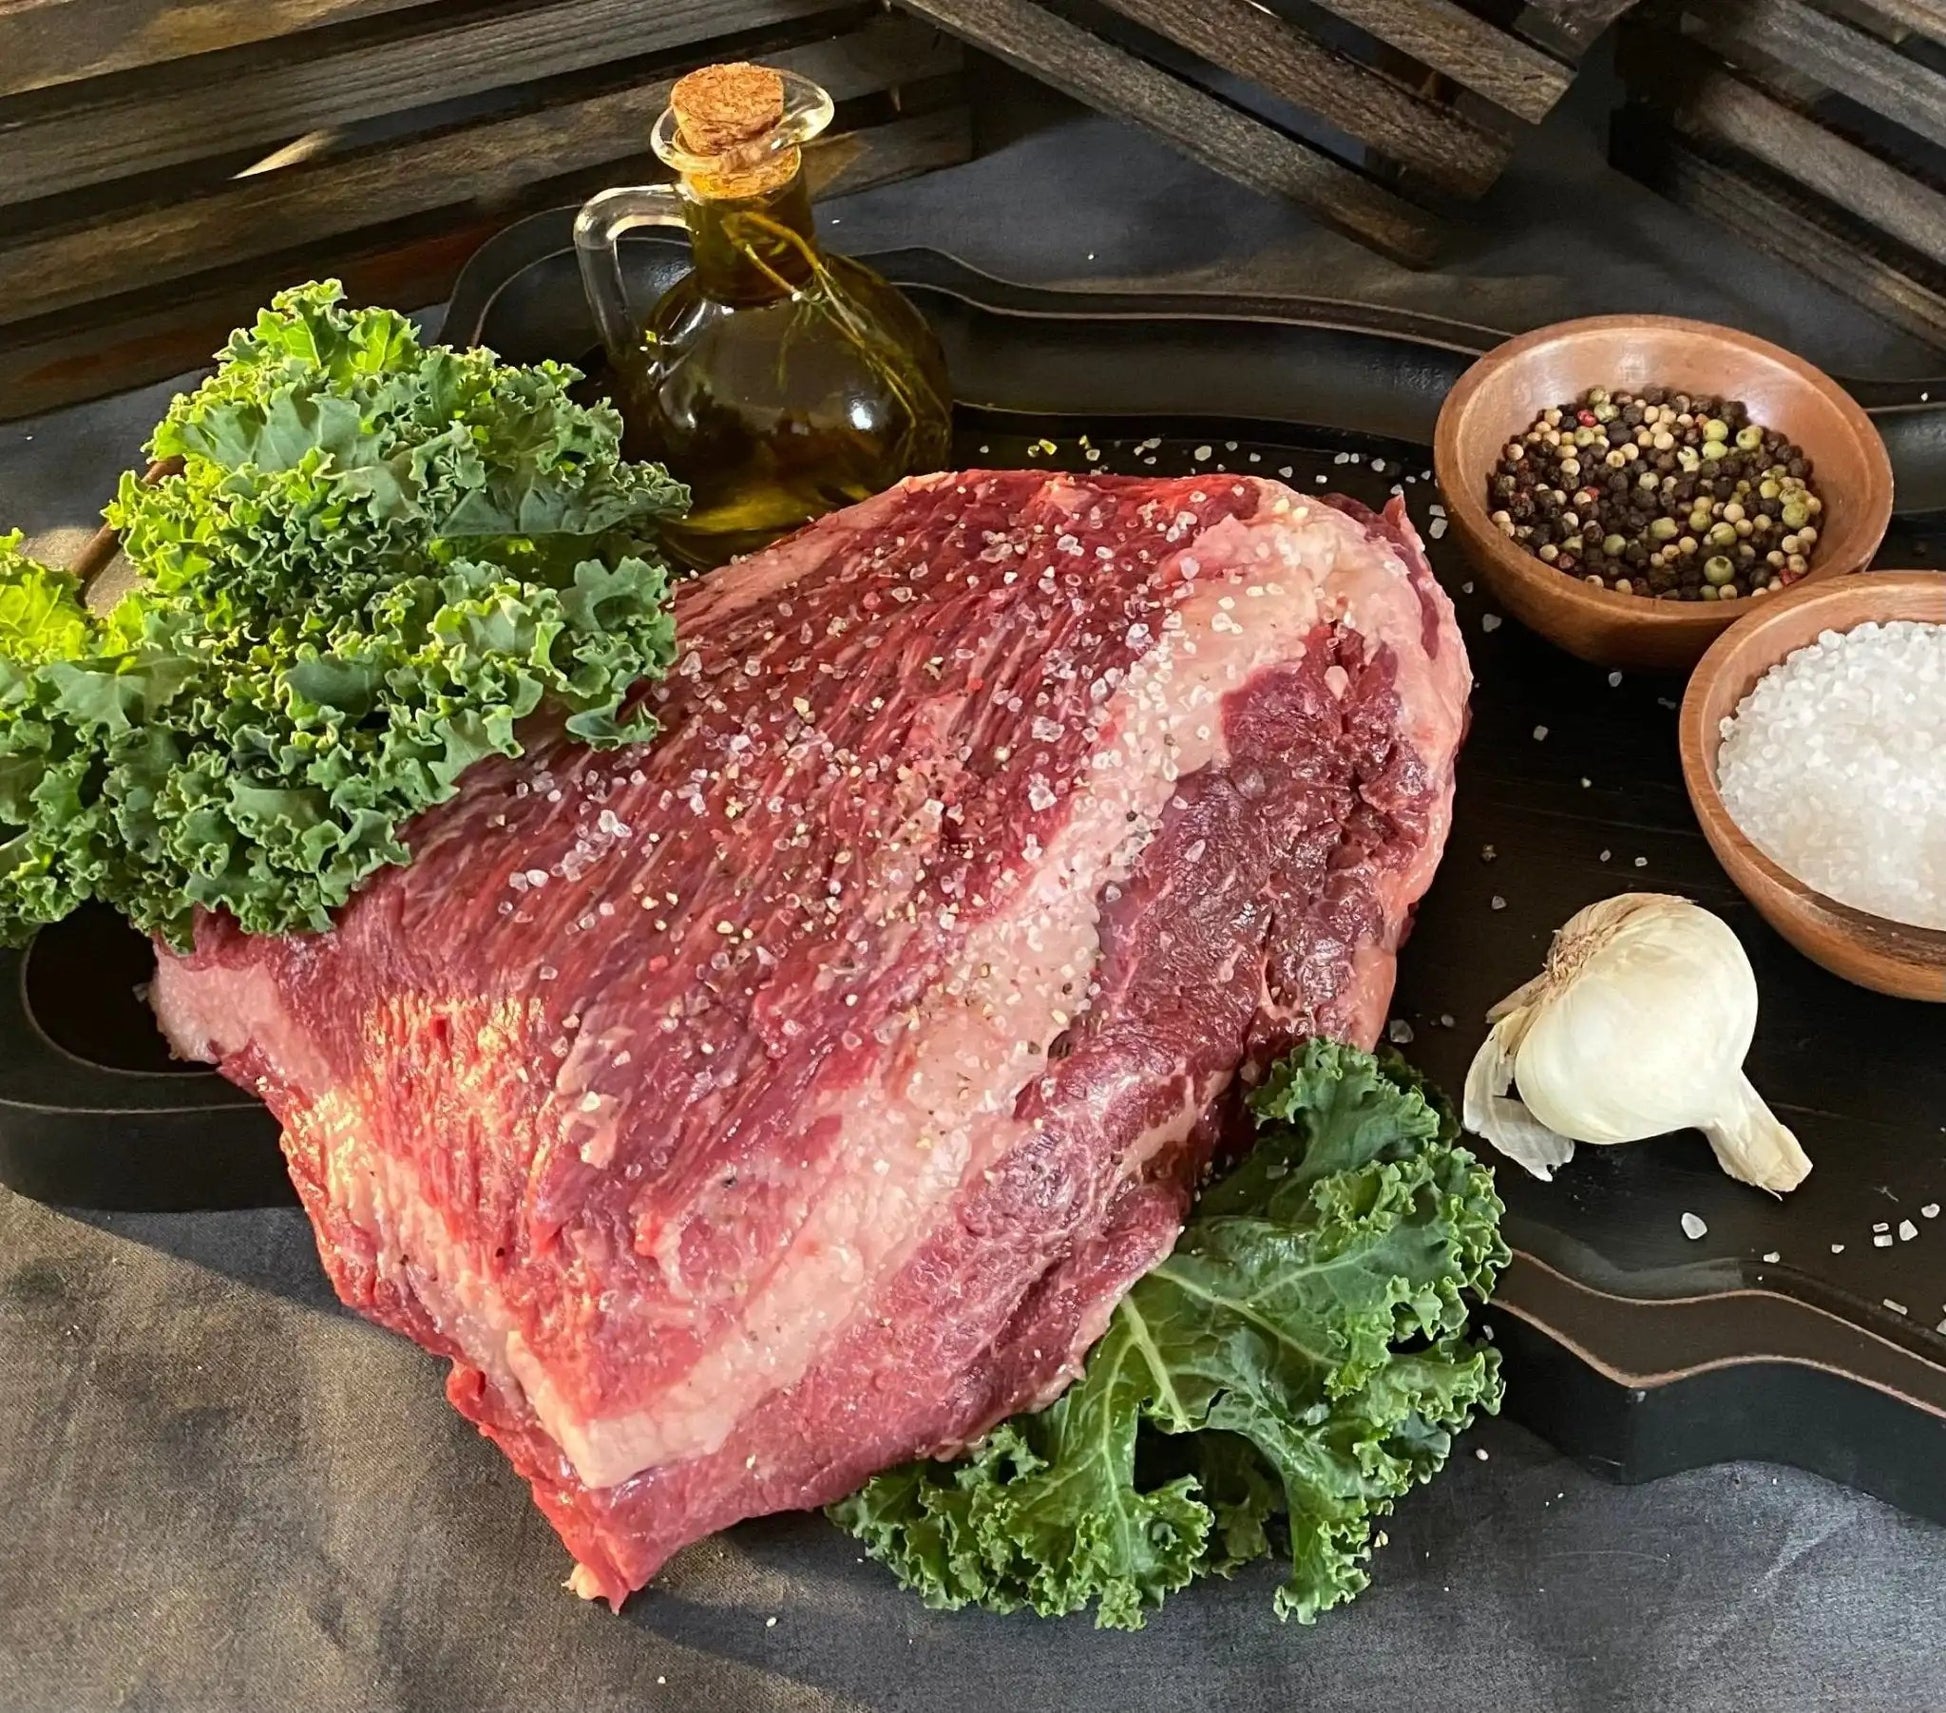 100% All-Natural Grass-fed American Wagyu Beef Brisket - The Hufeisen-Ranch (WYO Wagyu)